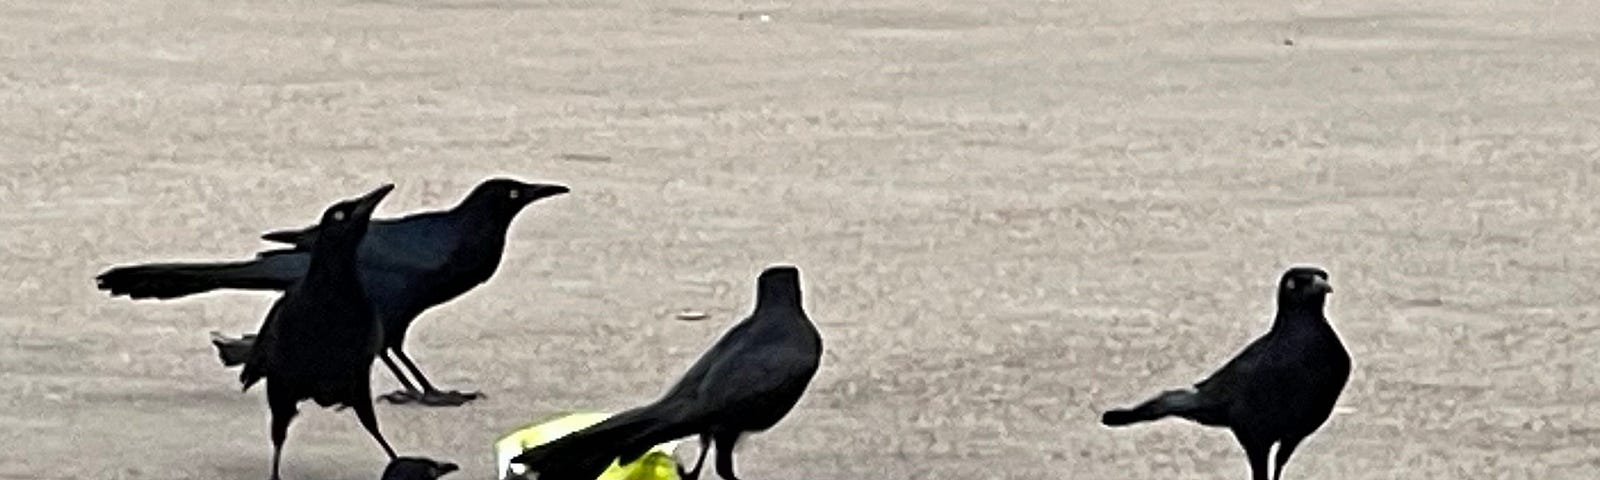 Long-tailed grackles eating potato chips.